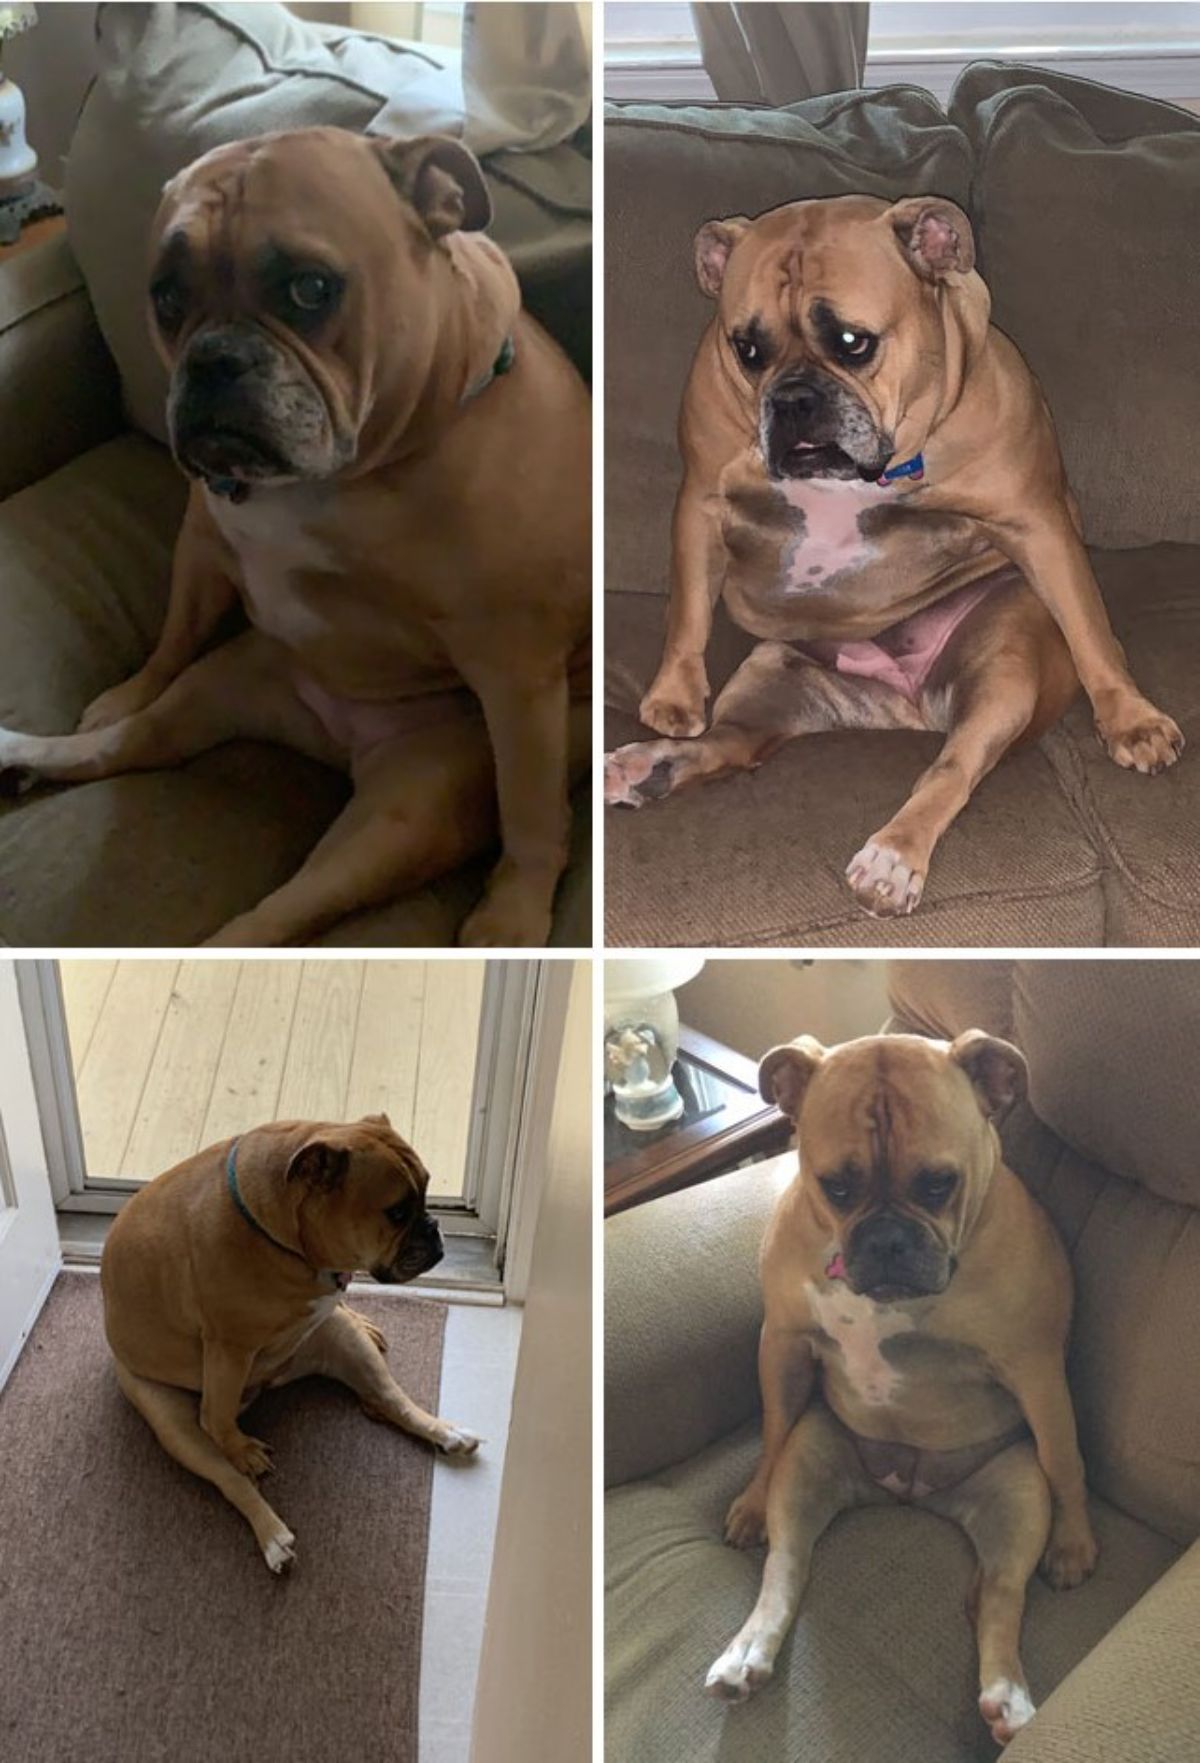 4 photos of brown and white dog sitting up on its haunches